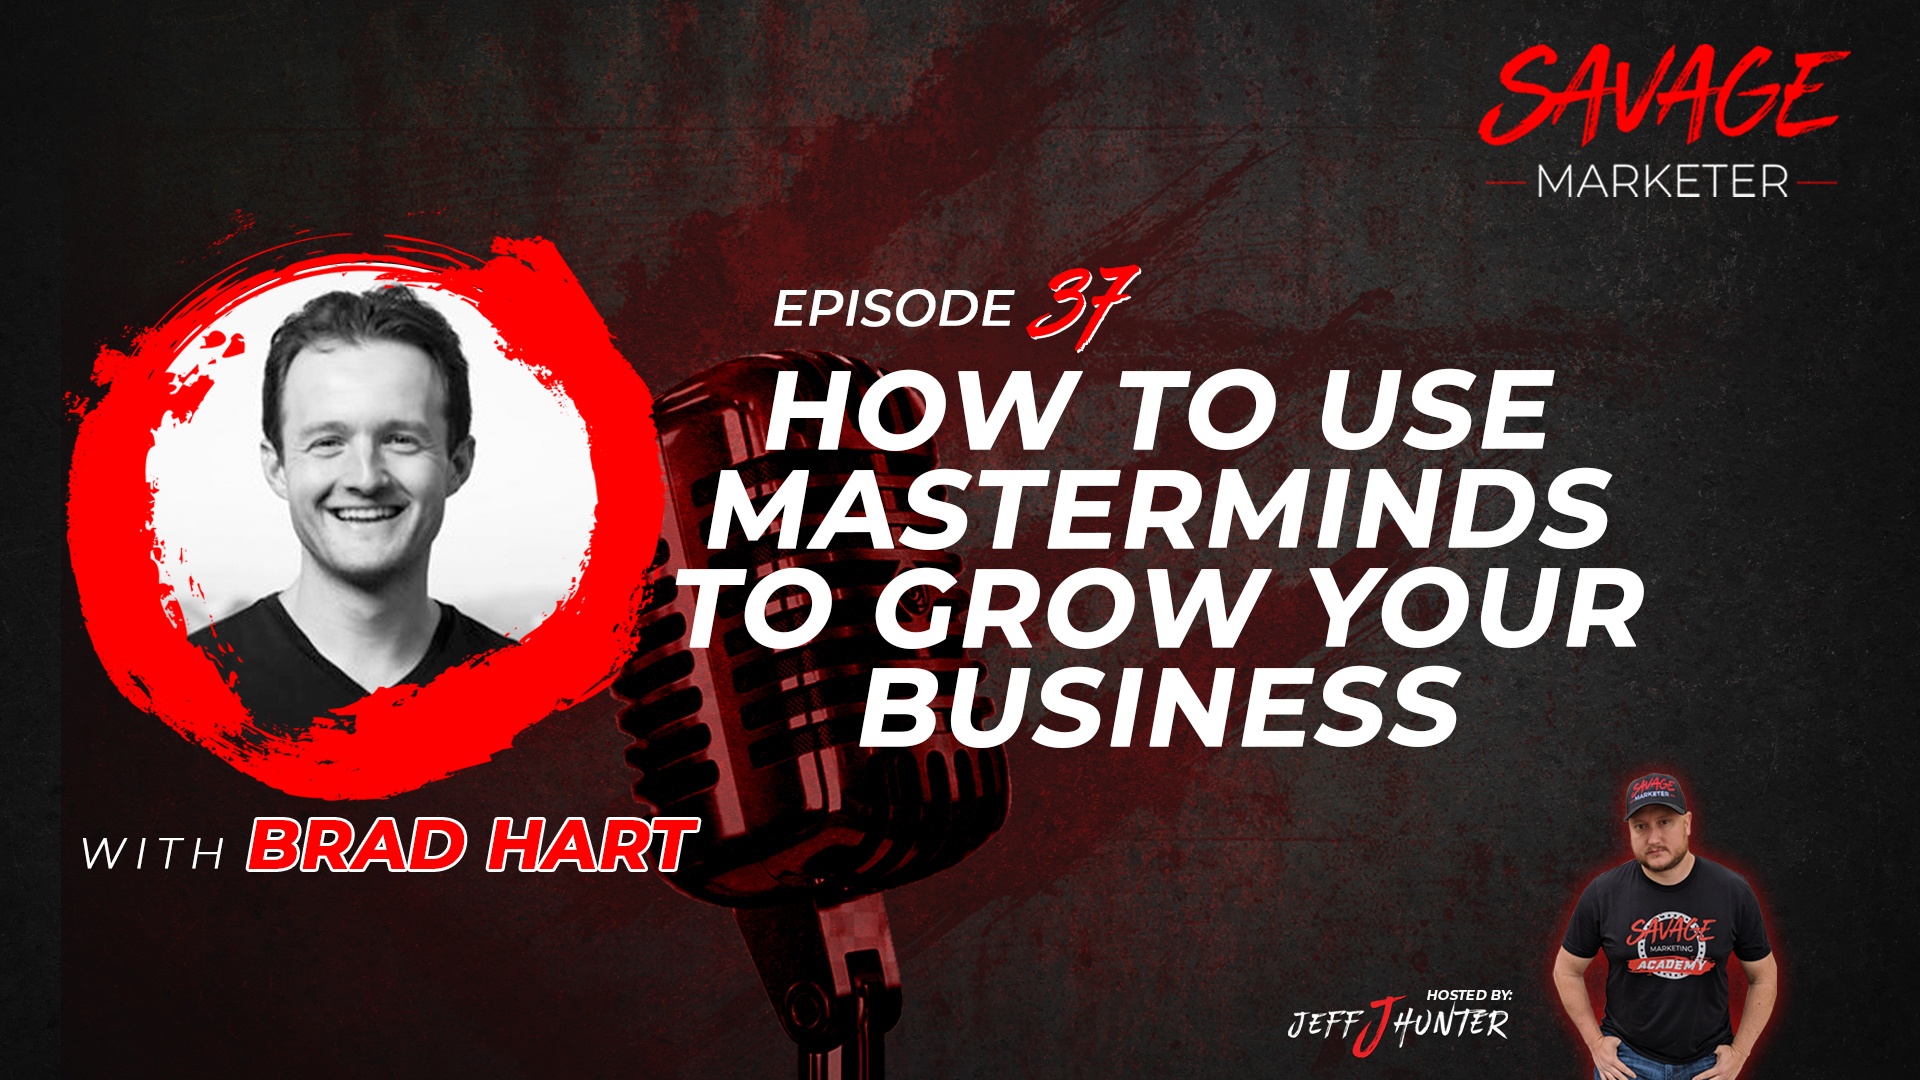 How To Use Masterminds To Grow Your Business with Brad Hart